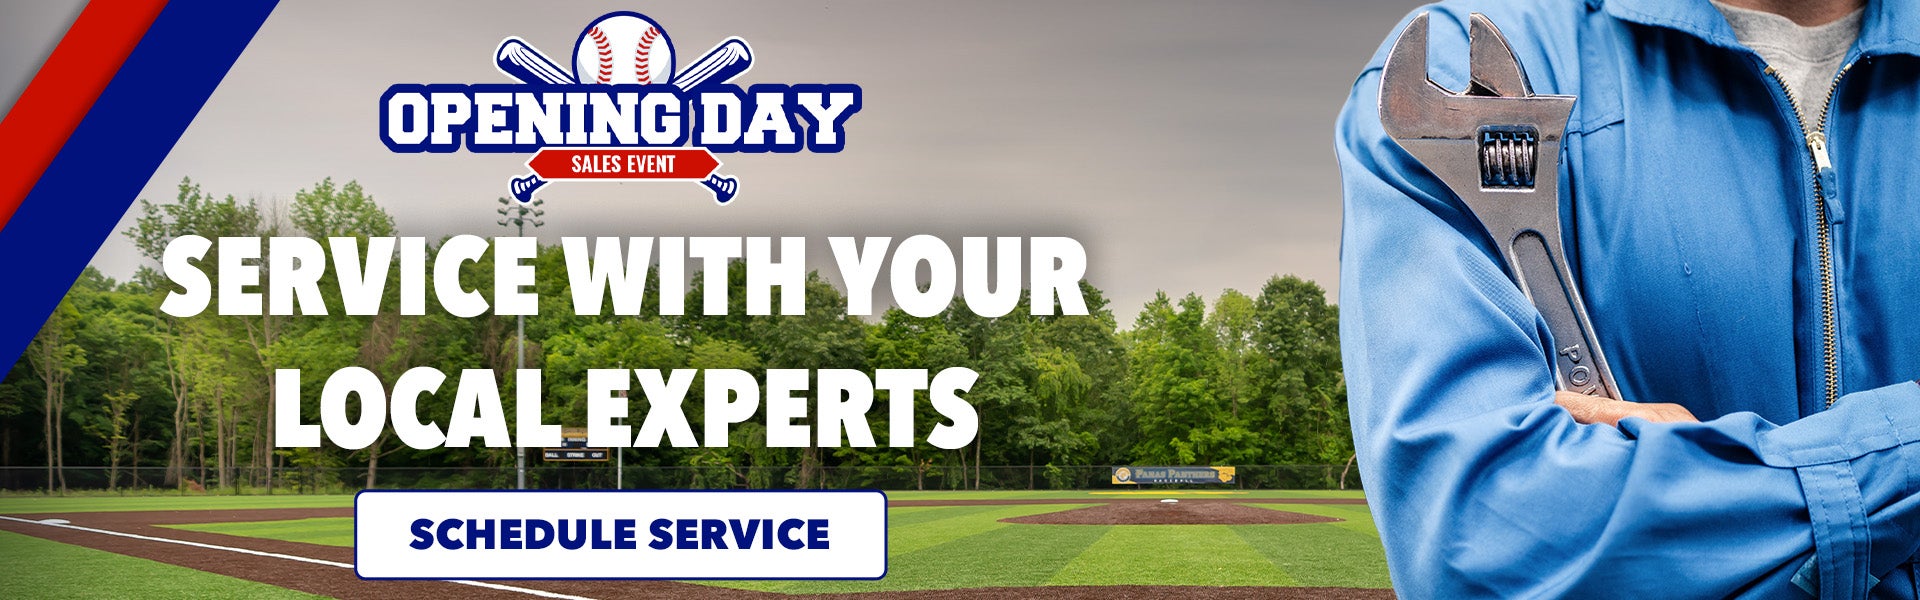 Schedule Service With Your Local Experts